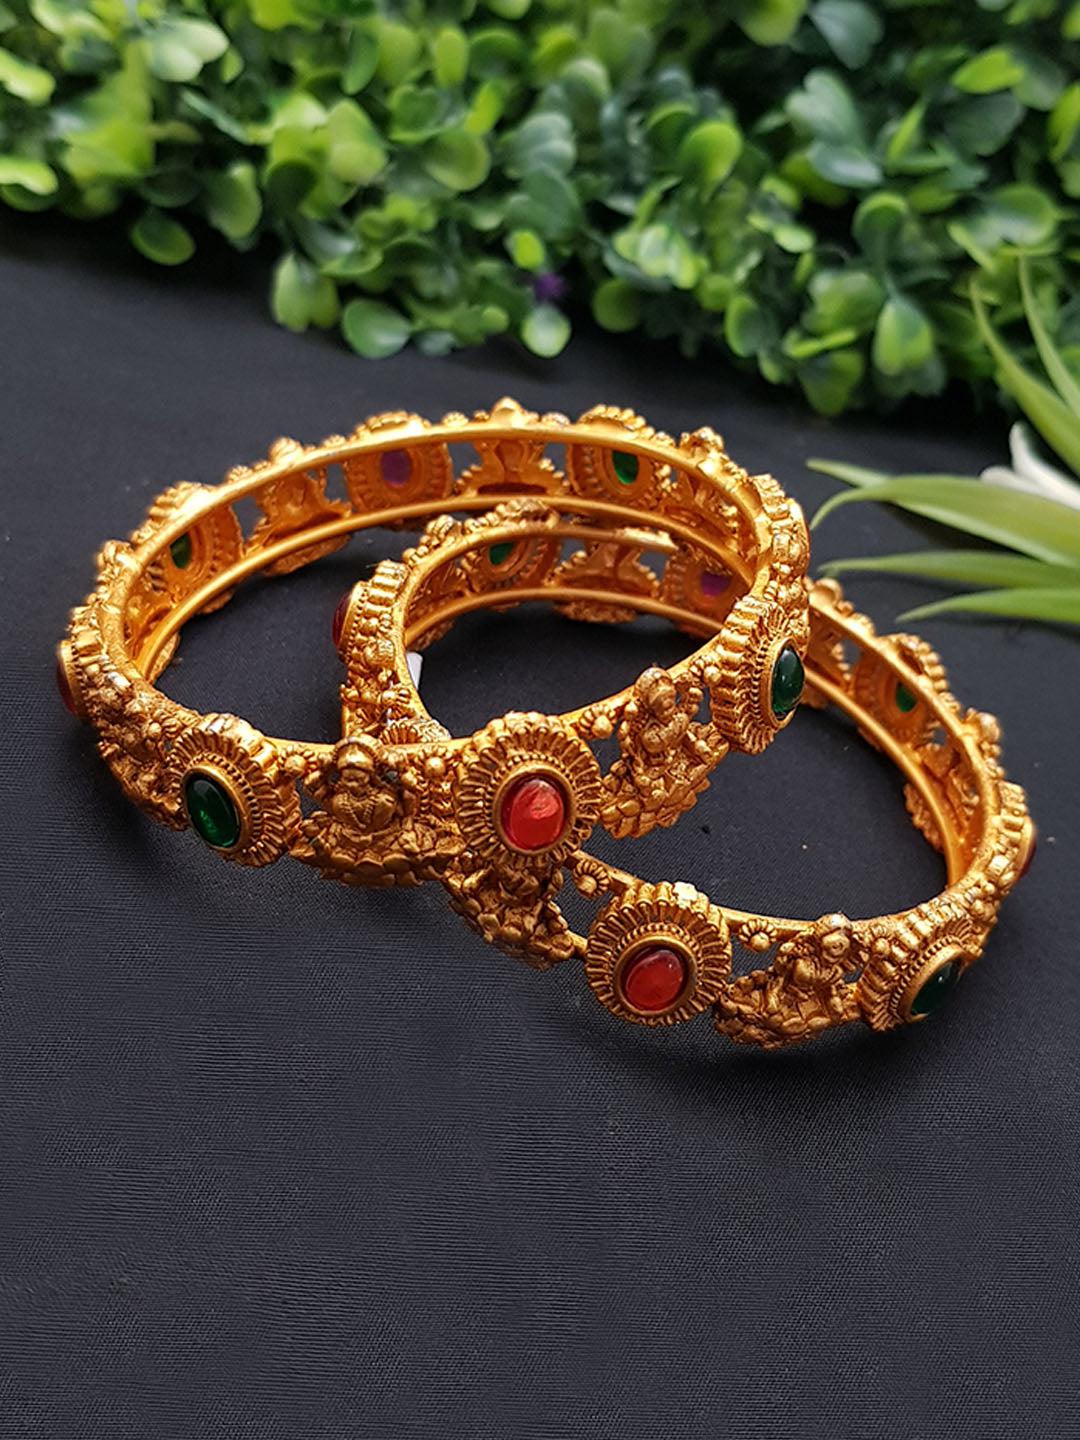 Gold-Plated-Set-of-2-Bangles-with-AD-stones-6966A-Designer-Bangles-Griiham-2.4-Griiham